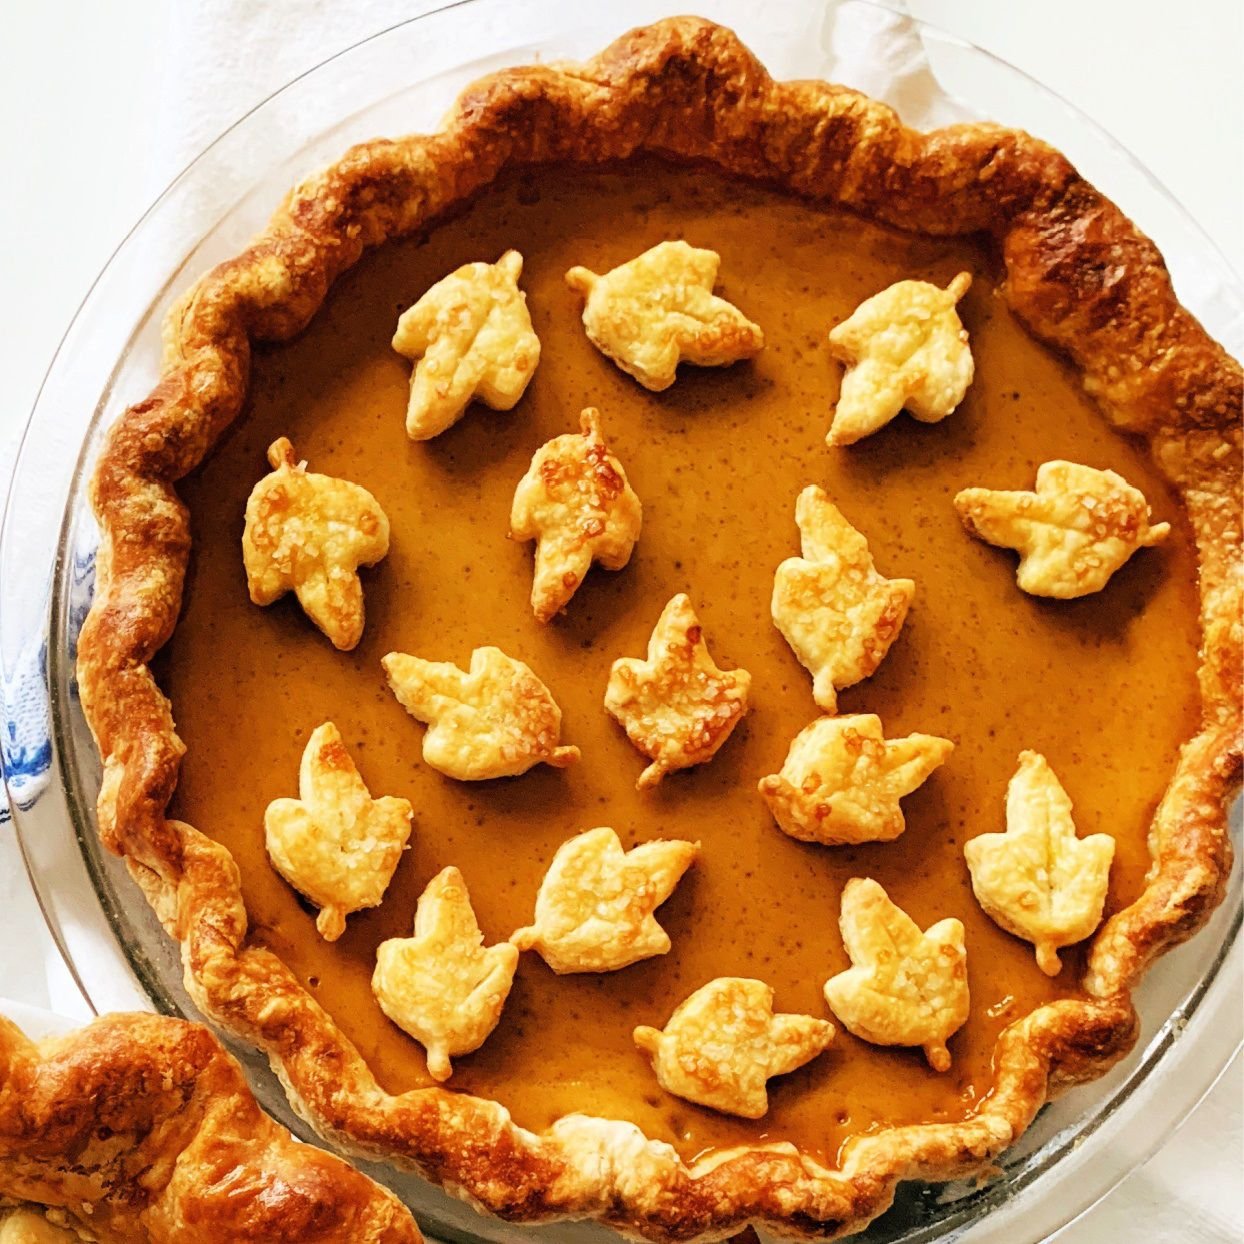 Our 10 Best Pumpkin Pie Recipes of All Time Are the Pick of the Pumpkin Patch